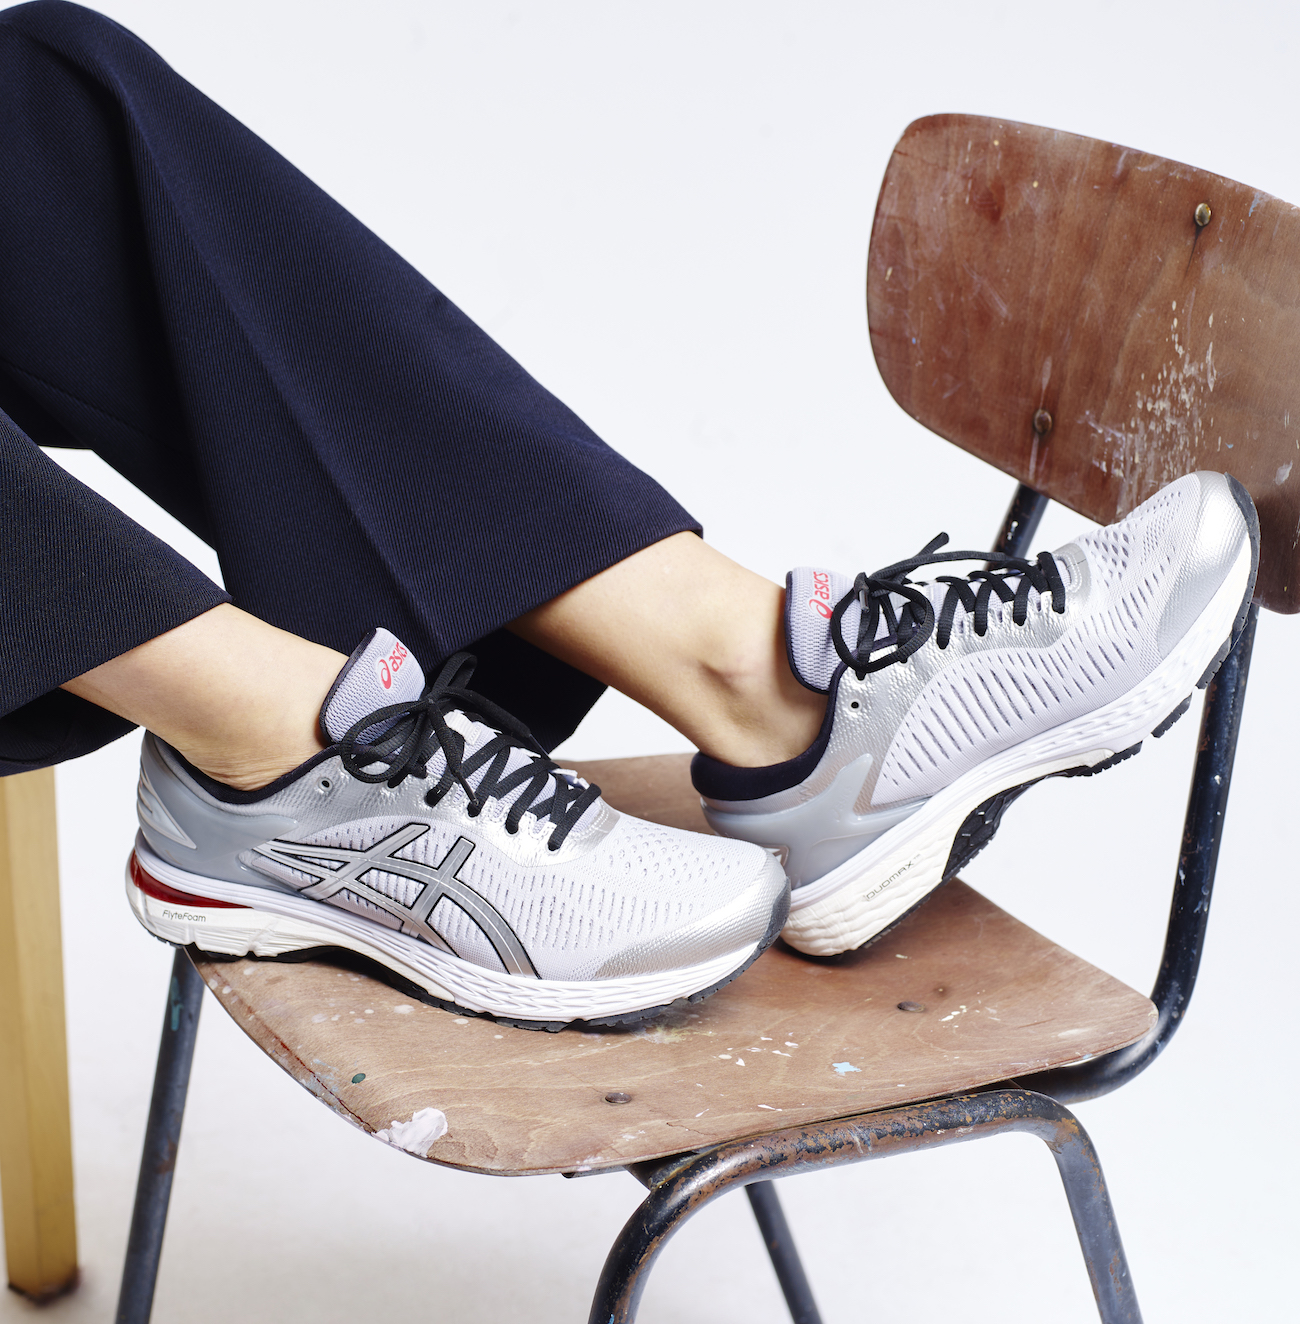 ASICS x Harmony Paris Join Forces to Debut GEL-KAYANO 25